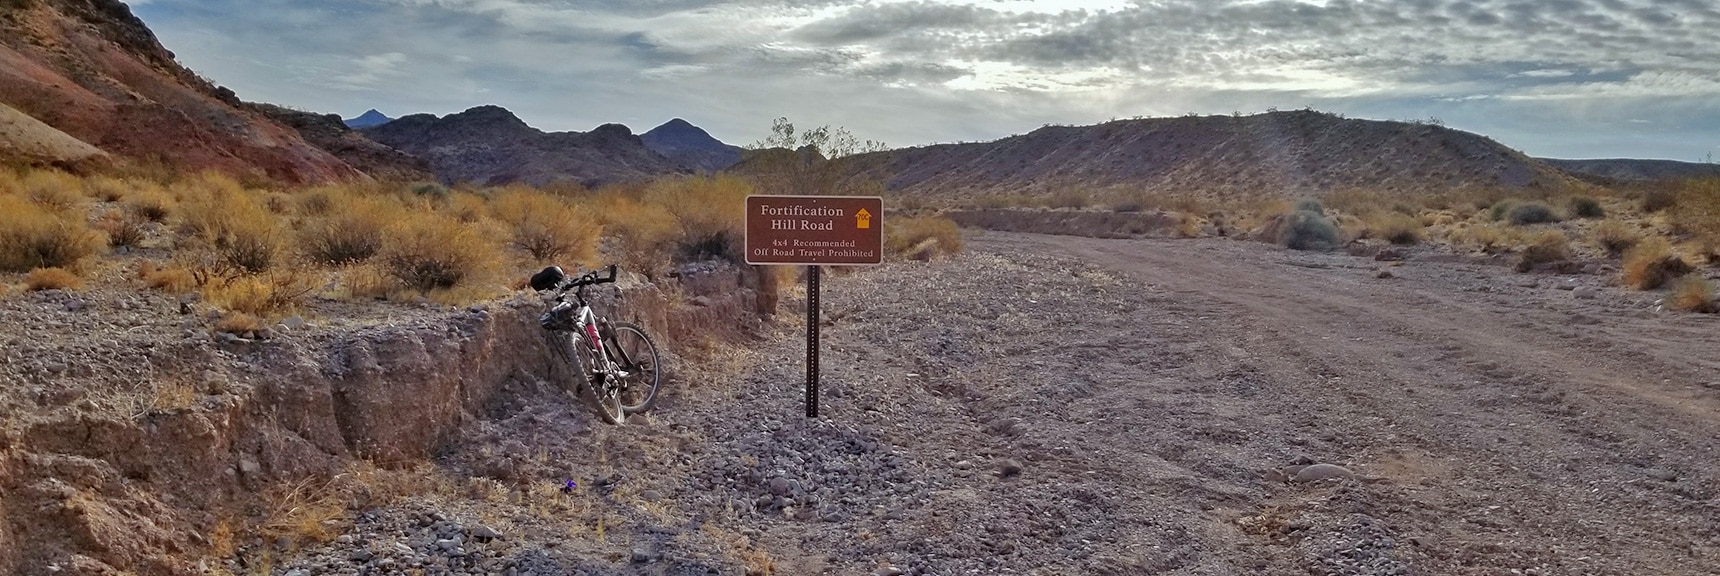 1st Road Sign 1/8th Miles Up Fortification Hill Road! No Sign at Entrance. | Fortification Hill | Lake Mead National Recreation Area, Arizona